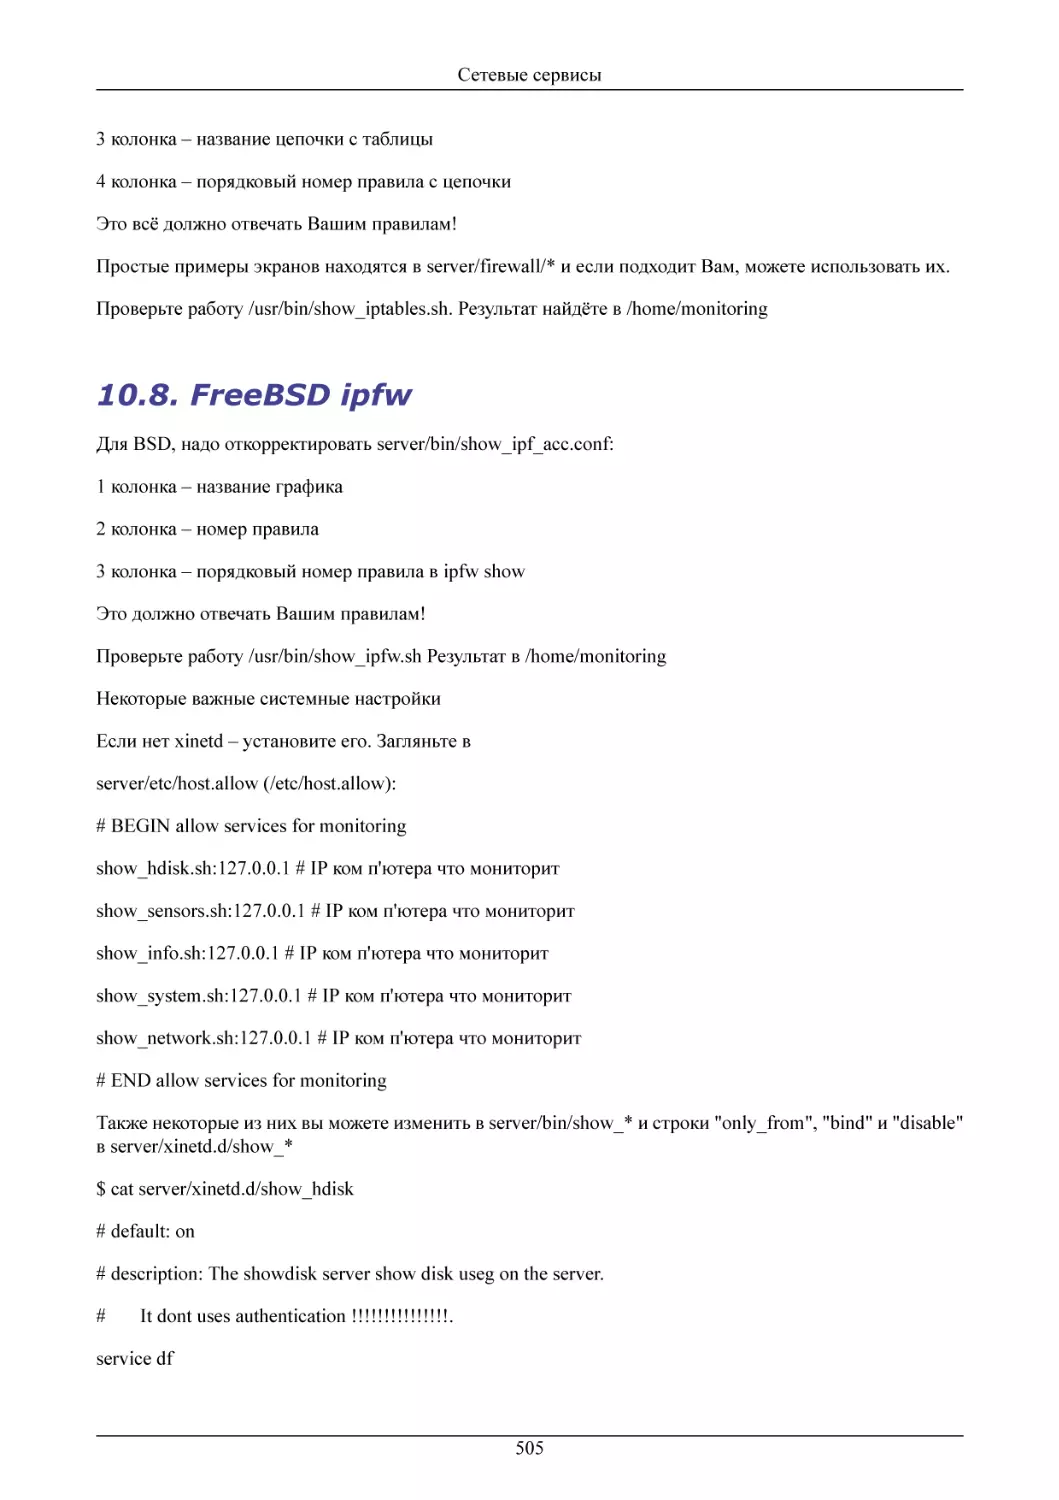 FreeBSD ipfw